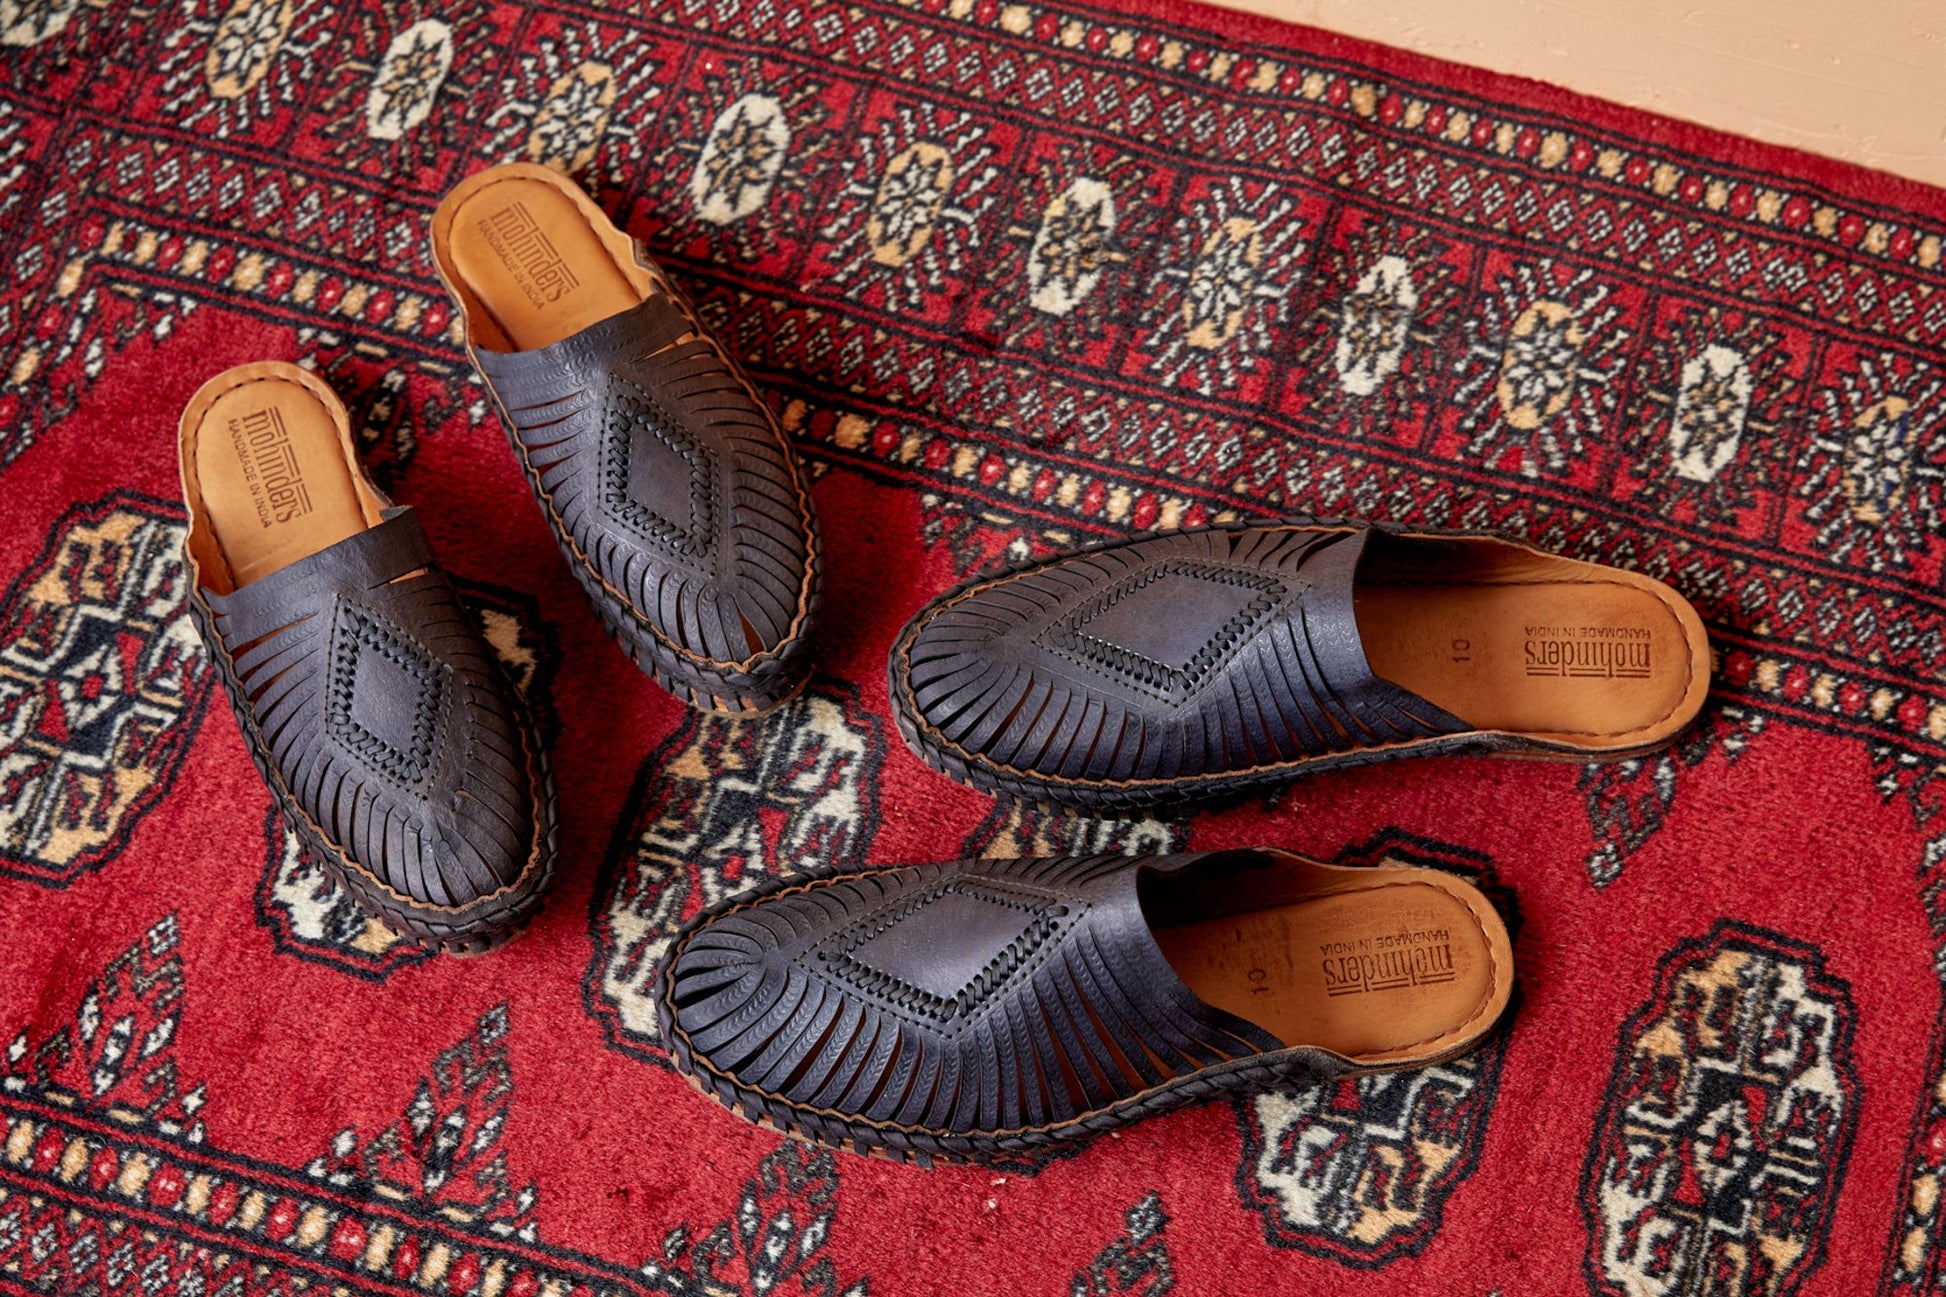 Women's iron dyed leather diamond slides by mohinders, made by hand in athani, india by master shoemakers